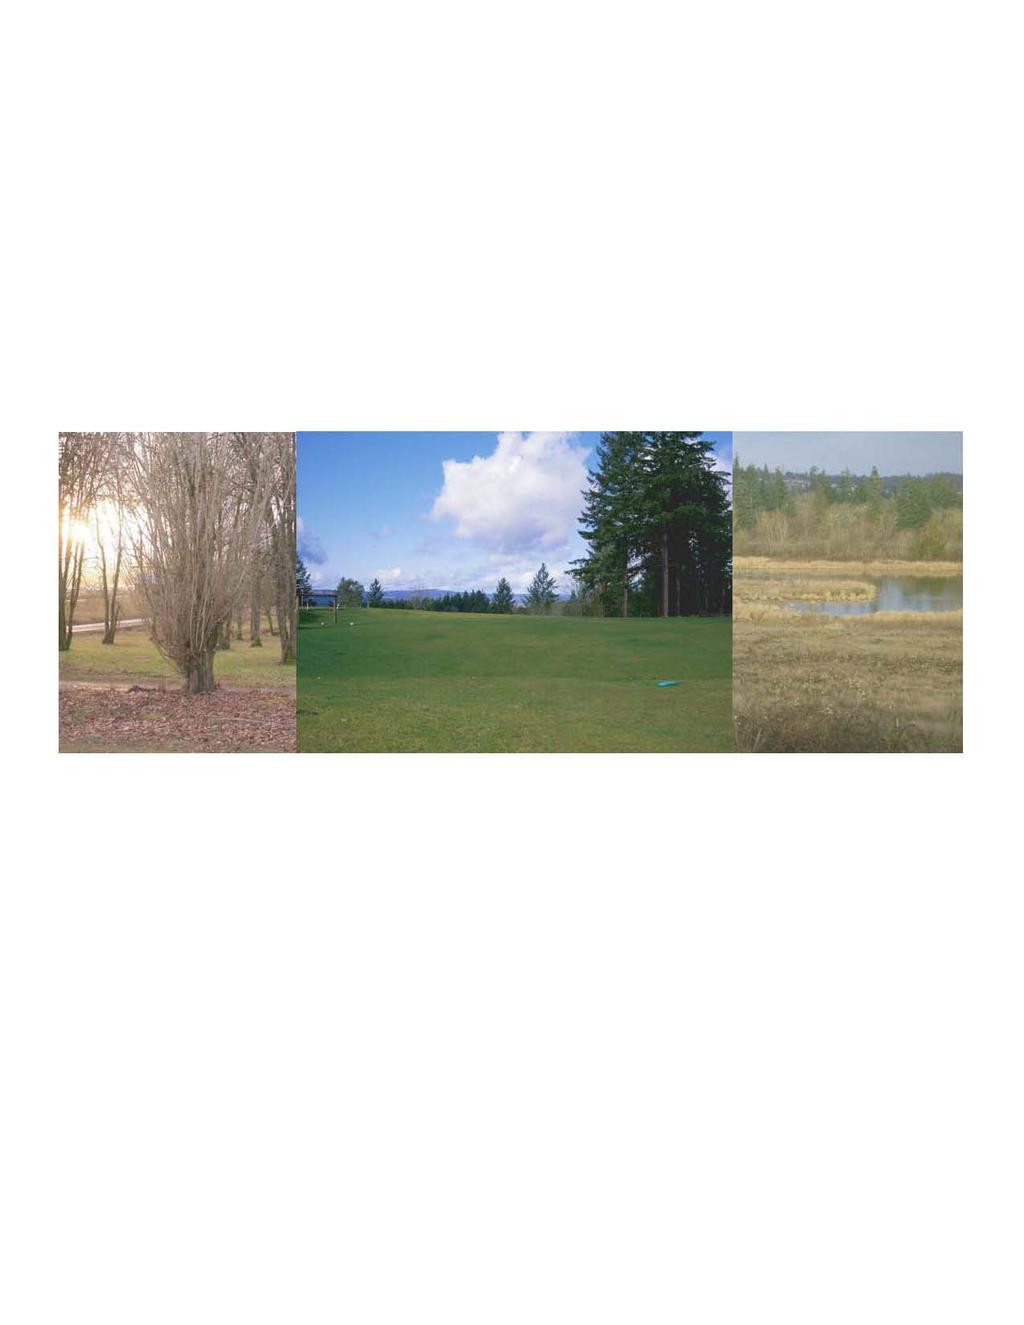 Section 3 - Inventory Parks, Open Space, School Grounds, and Trails Inventory The West Bull Mountain Planning Area is bordered by existing residential neighborhoods to the northeast and east and by